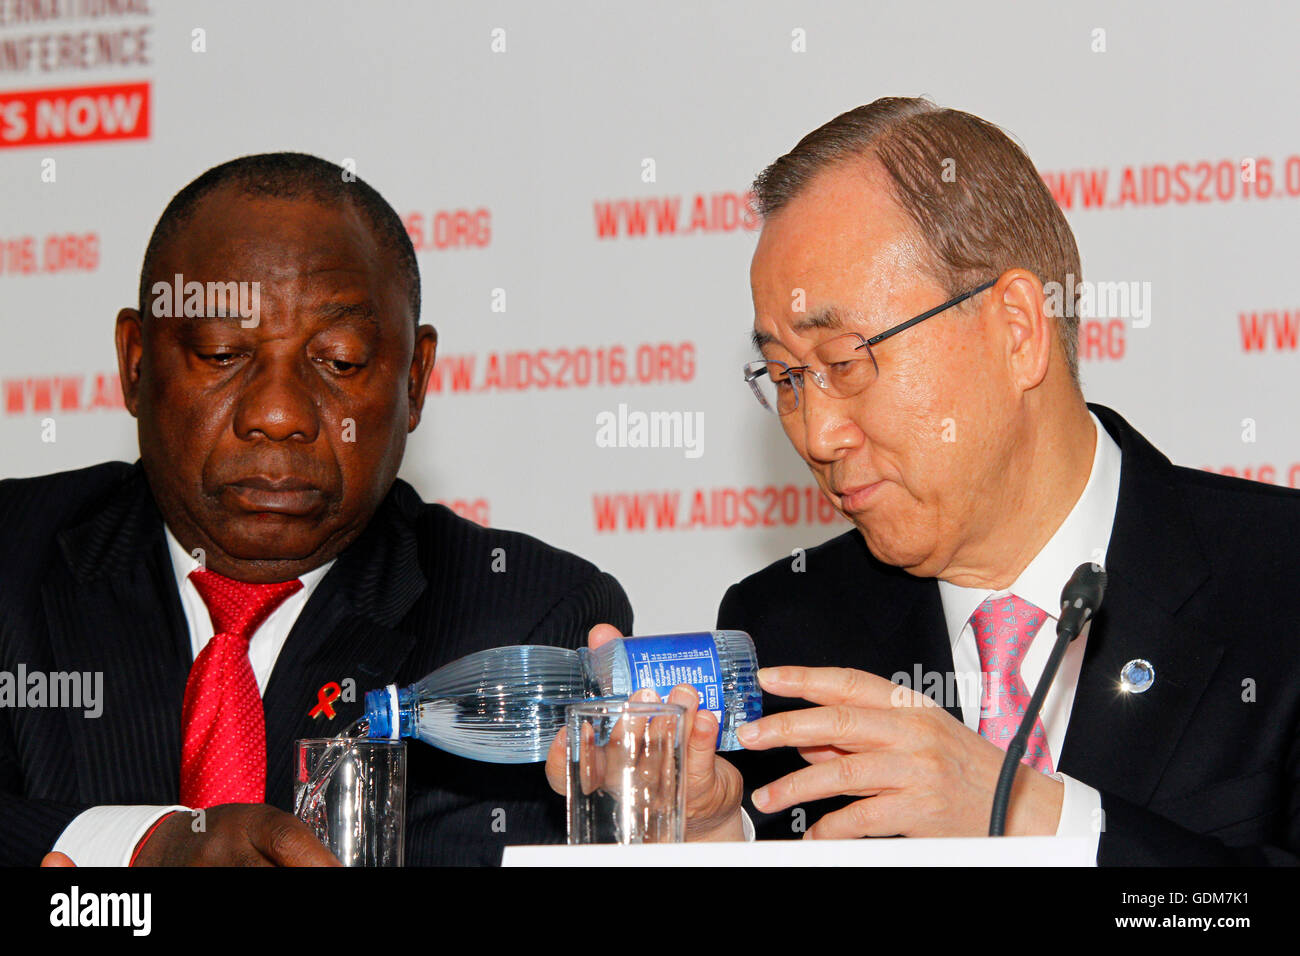 Durban, South Africa. 18th July, 2016. DURBAN - 18 July 2016 - United Nations secretary general Ban Ki-moon pours wated into a glass for South African deputy president Cyril Ramaphosa at the opening press conference of the 21st World Aids Conference being held in Durban. - Credit:  Giordano Stolley/Alamy Live News Stock Photo